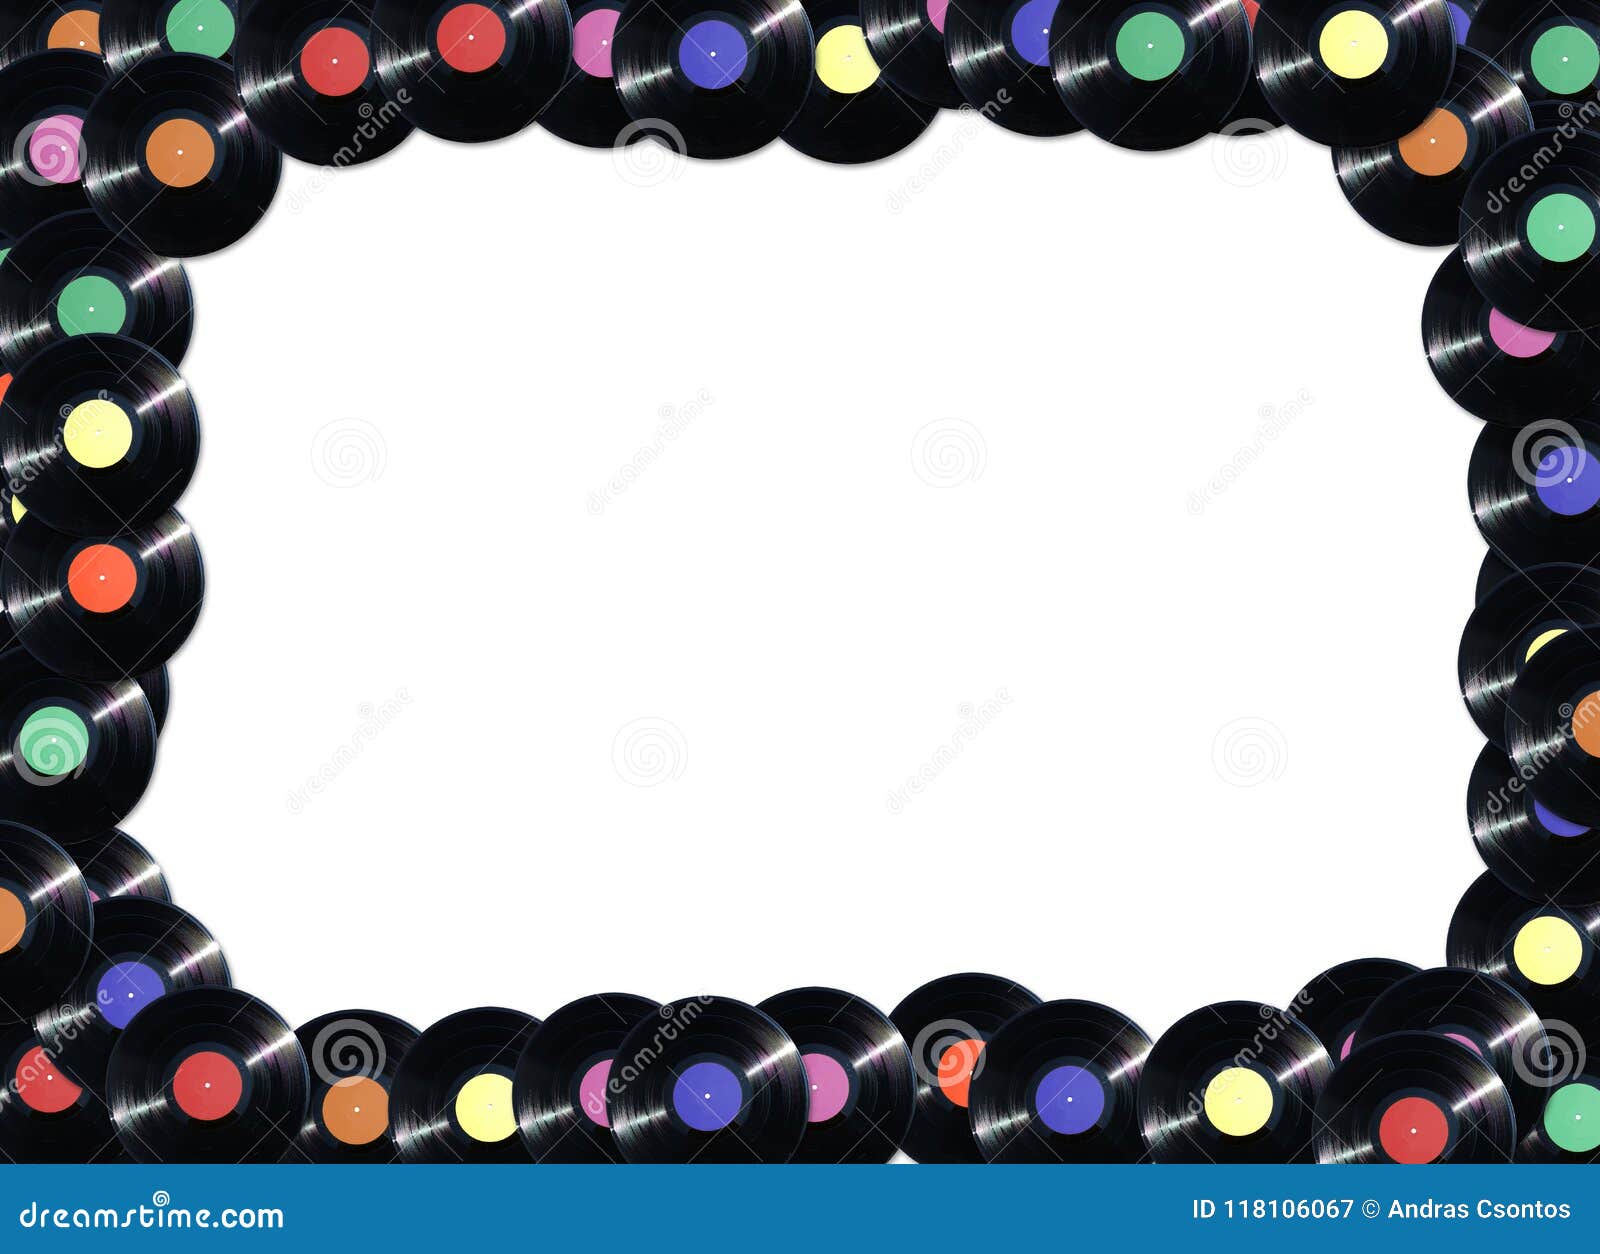 frame made from vinyl records in different label colors